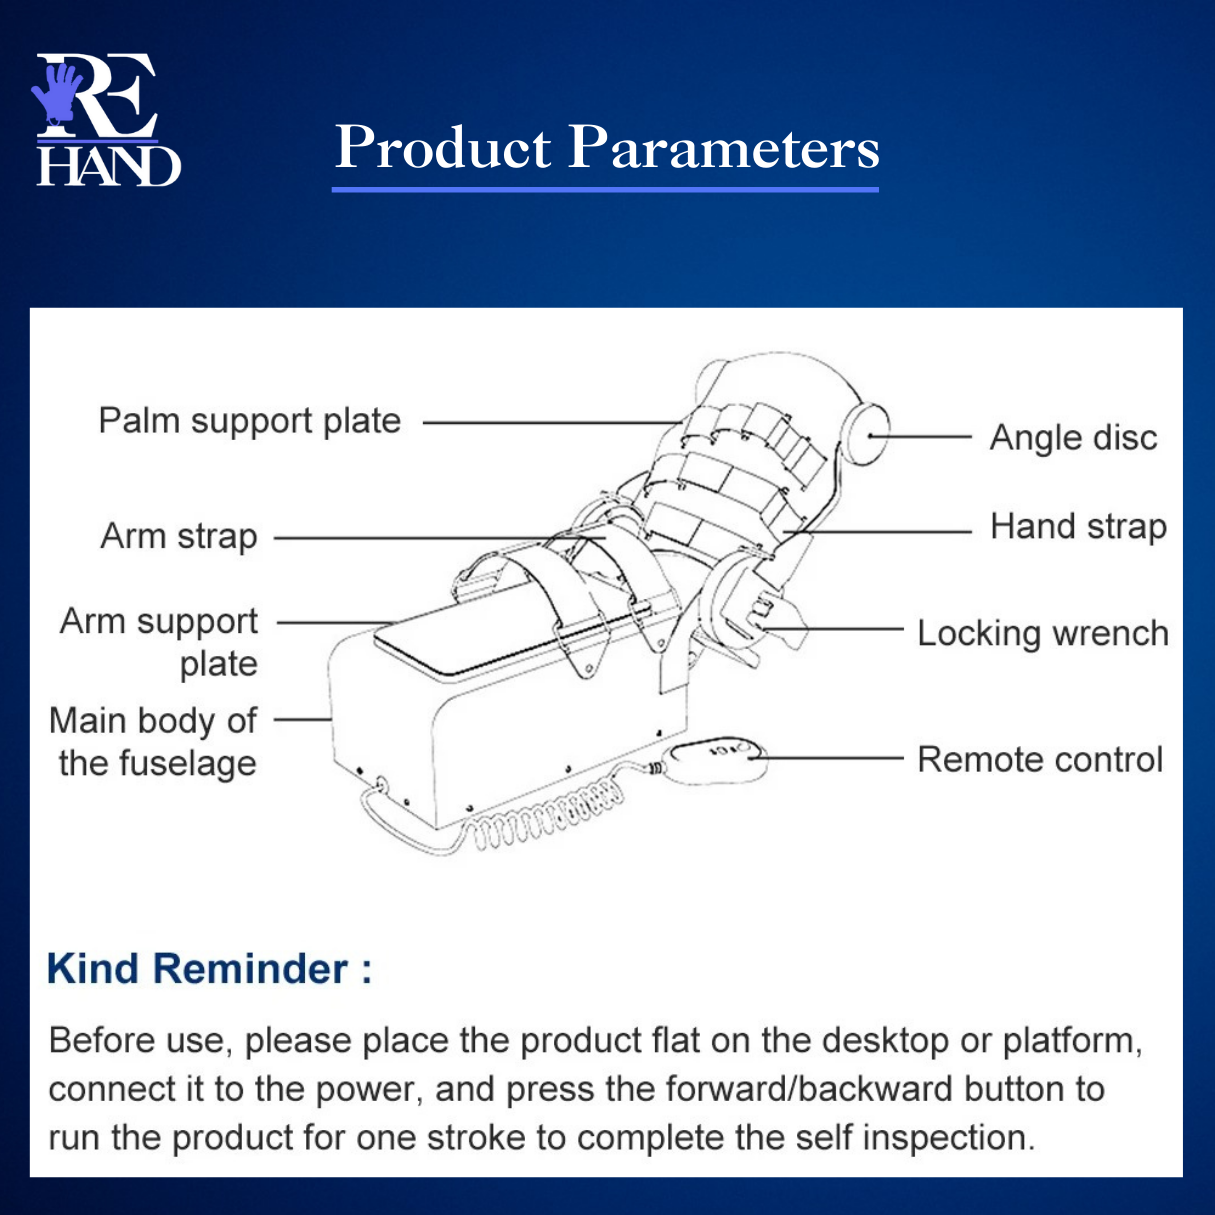 ReHAND™ Electric Wrist Joint Trainer